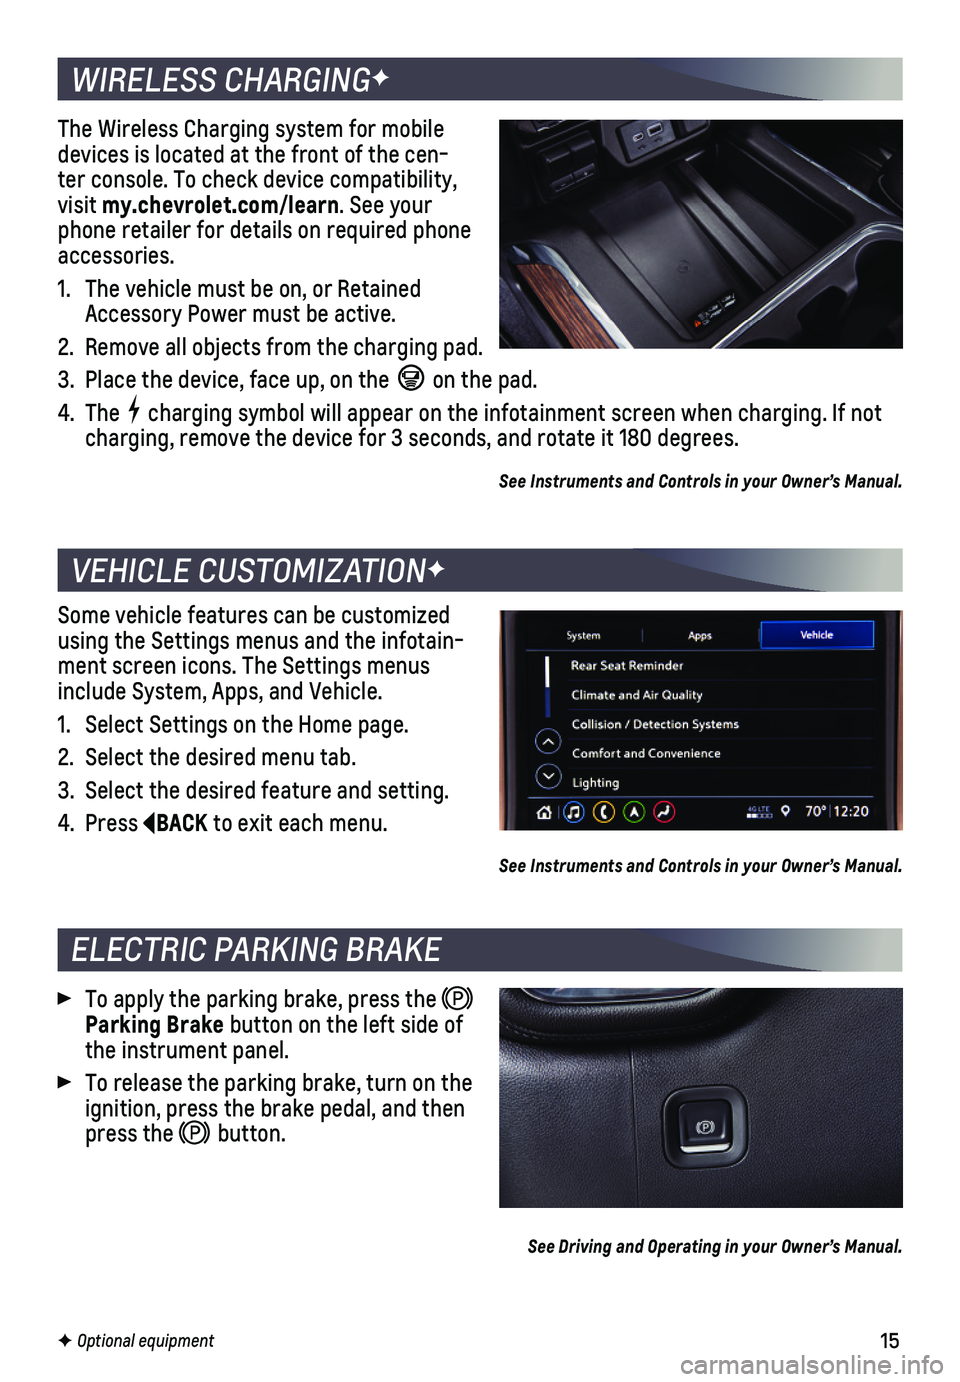 CHEVROLET SILVERADO 2020  Get To Know Guide 15
WIRELESS CHARGINGF
VEHICLE CUSTOMIZATIONF
The Wireless Charging system for mobile devices is located at the front of the cen-ter console. To check device compatibility, visit my.chevrolet.com/learn